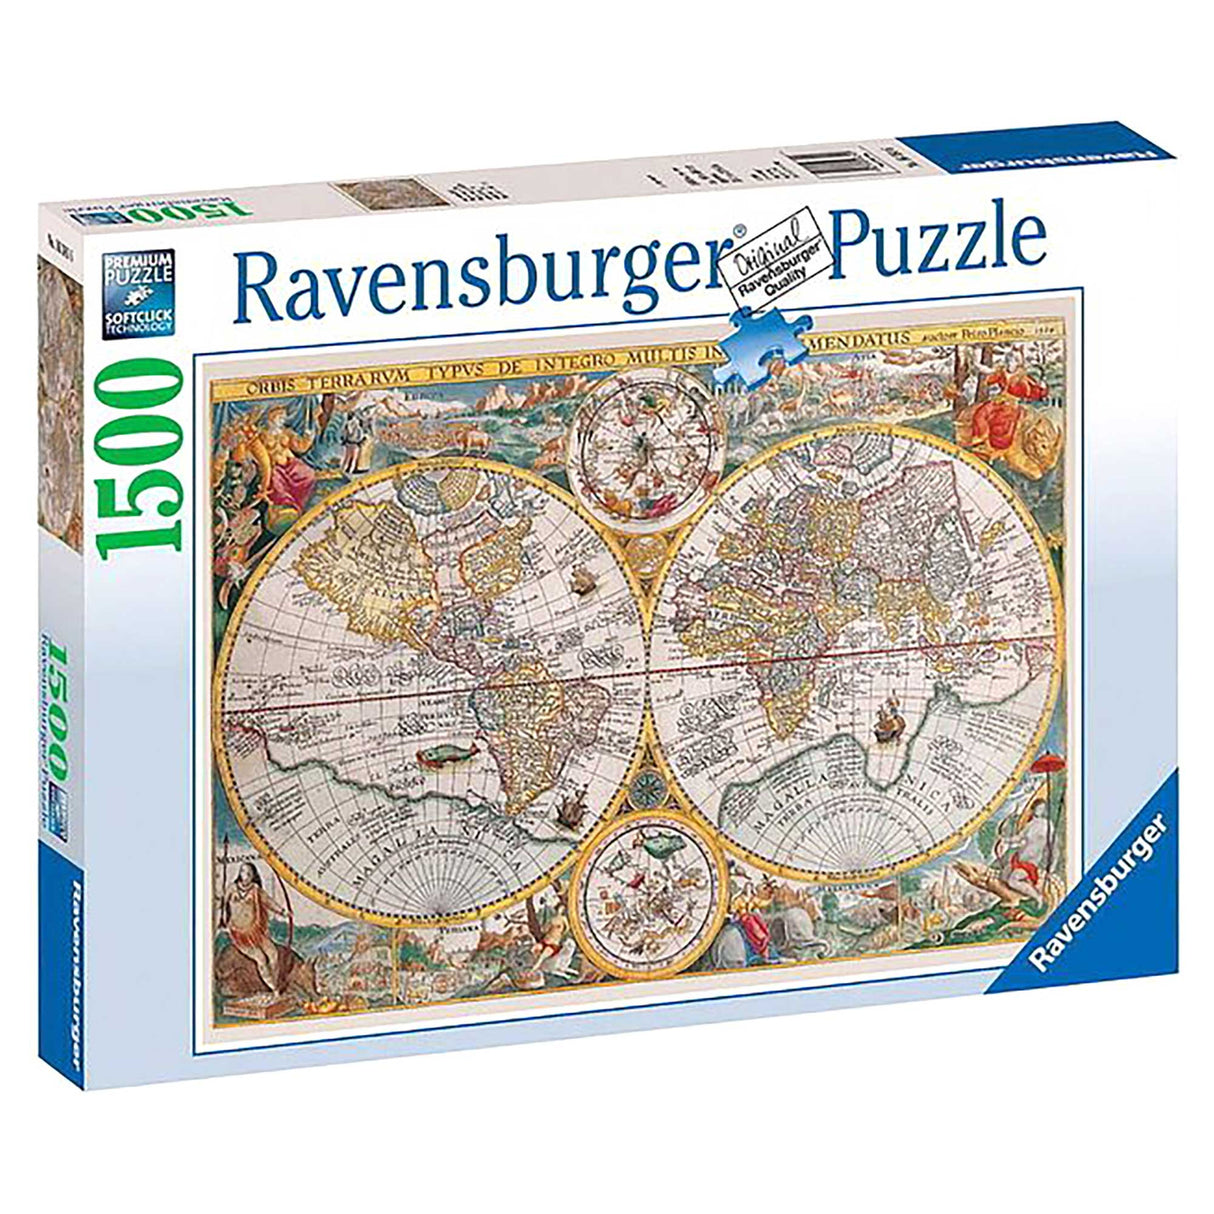 Ravensburger Historical Map Jigsaw Puzzle (1500 pieces)